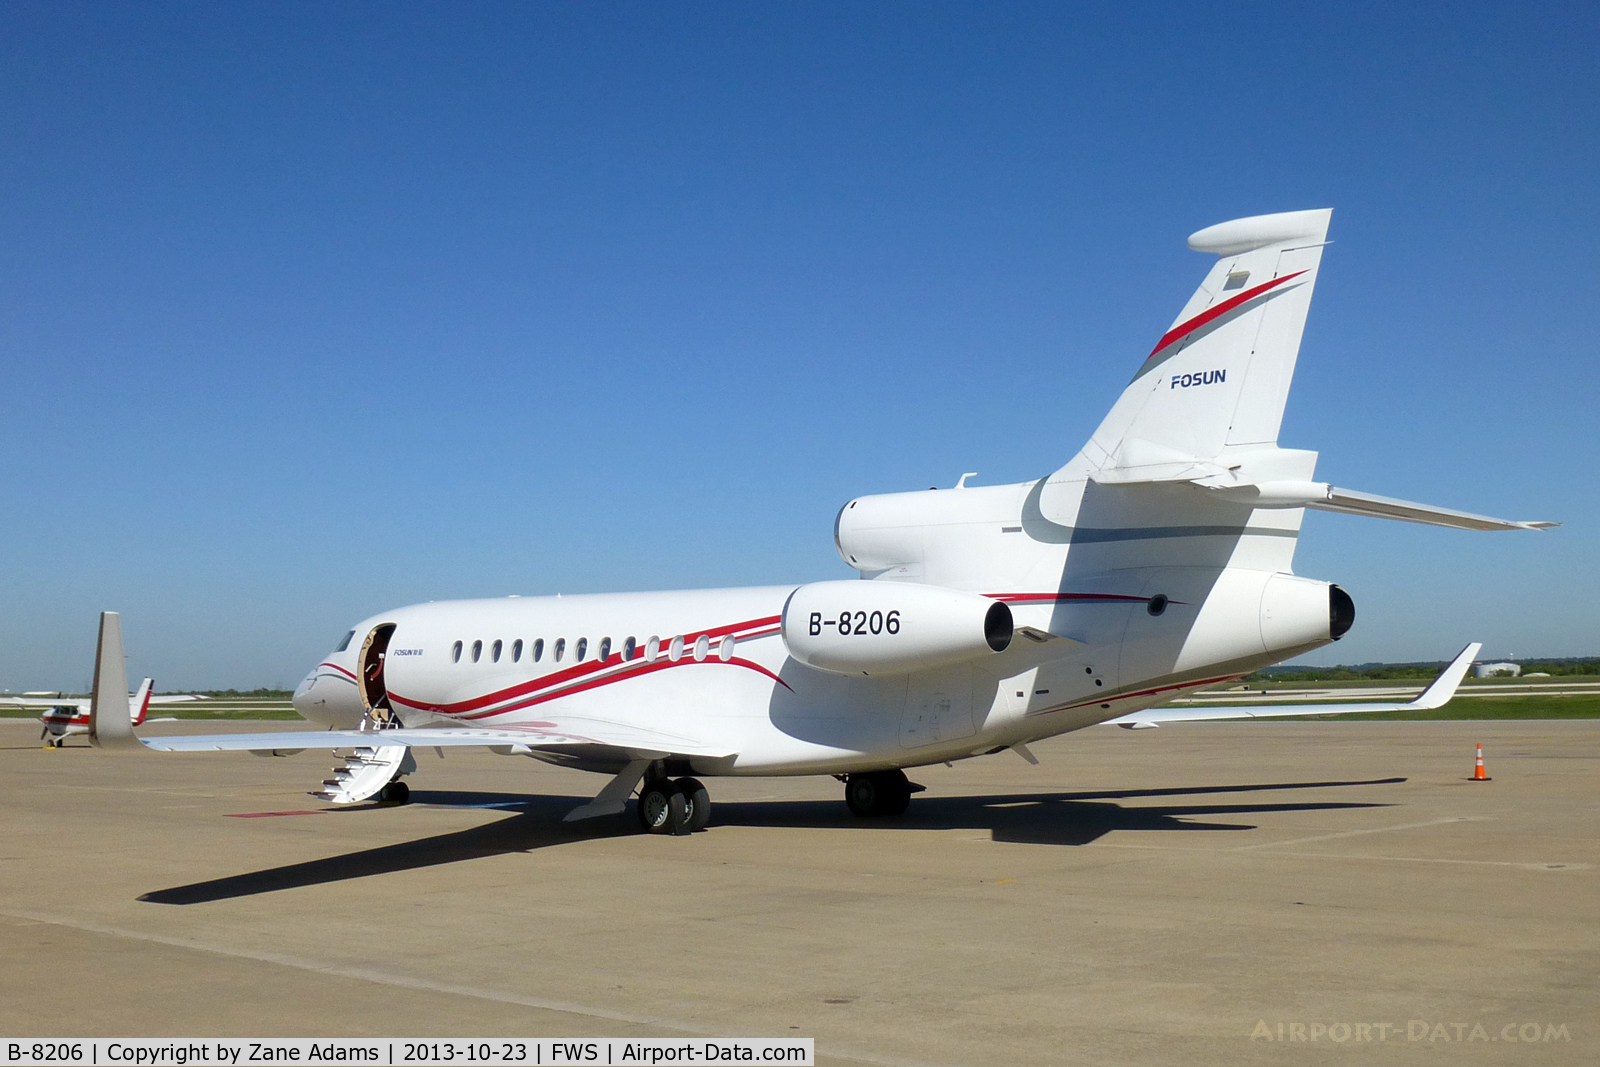 B-8206, 2011 Dassault Falcon 7X C/N 144, At Spinks Airport - Ft. Worth, TX